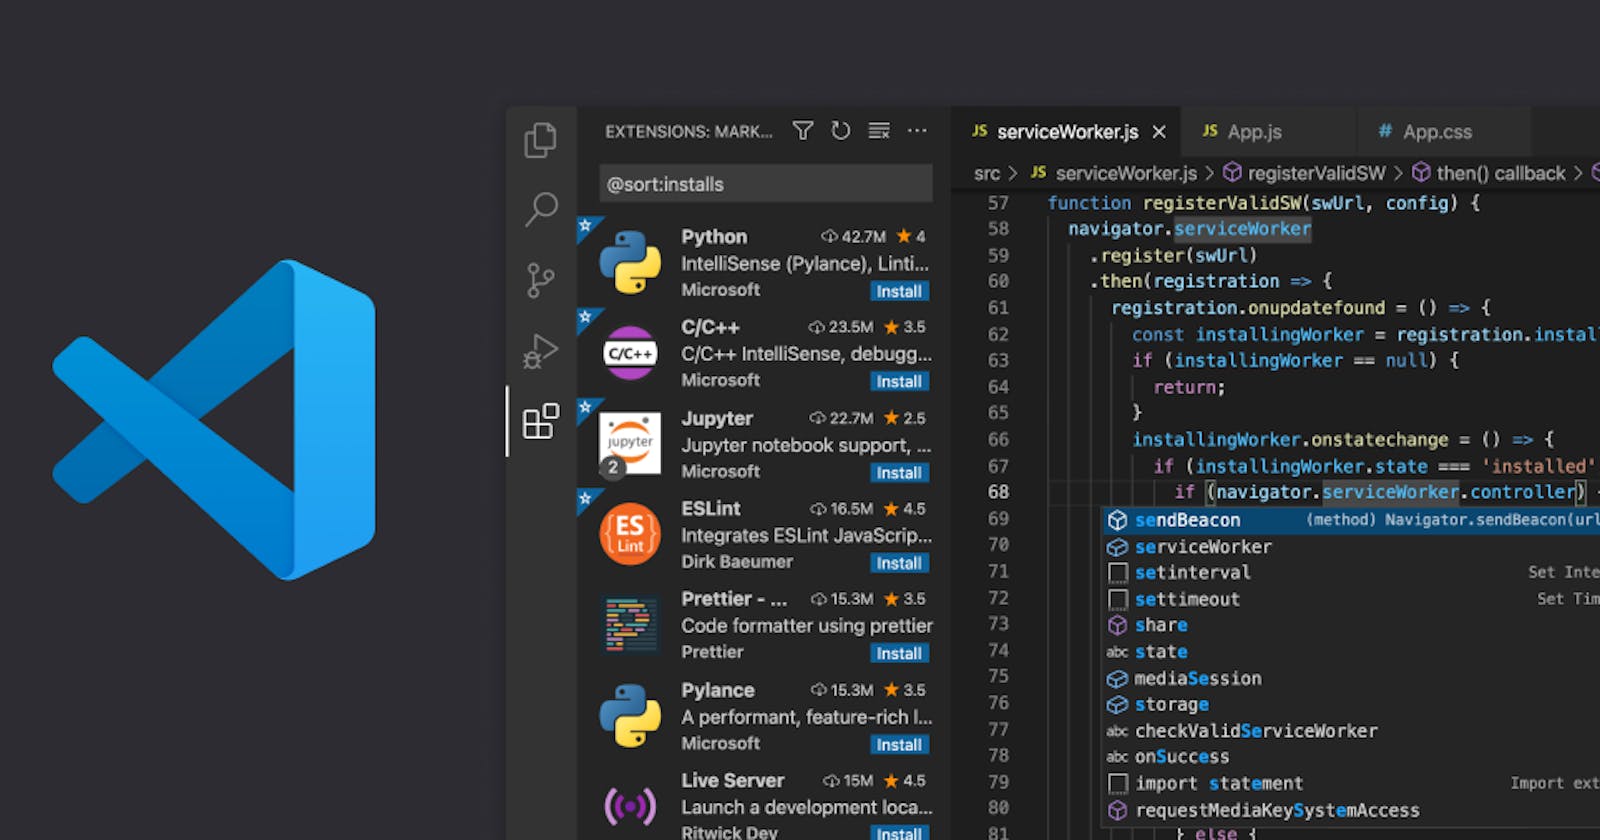 5 Code editors with its own advantages and disadvantages